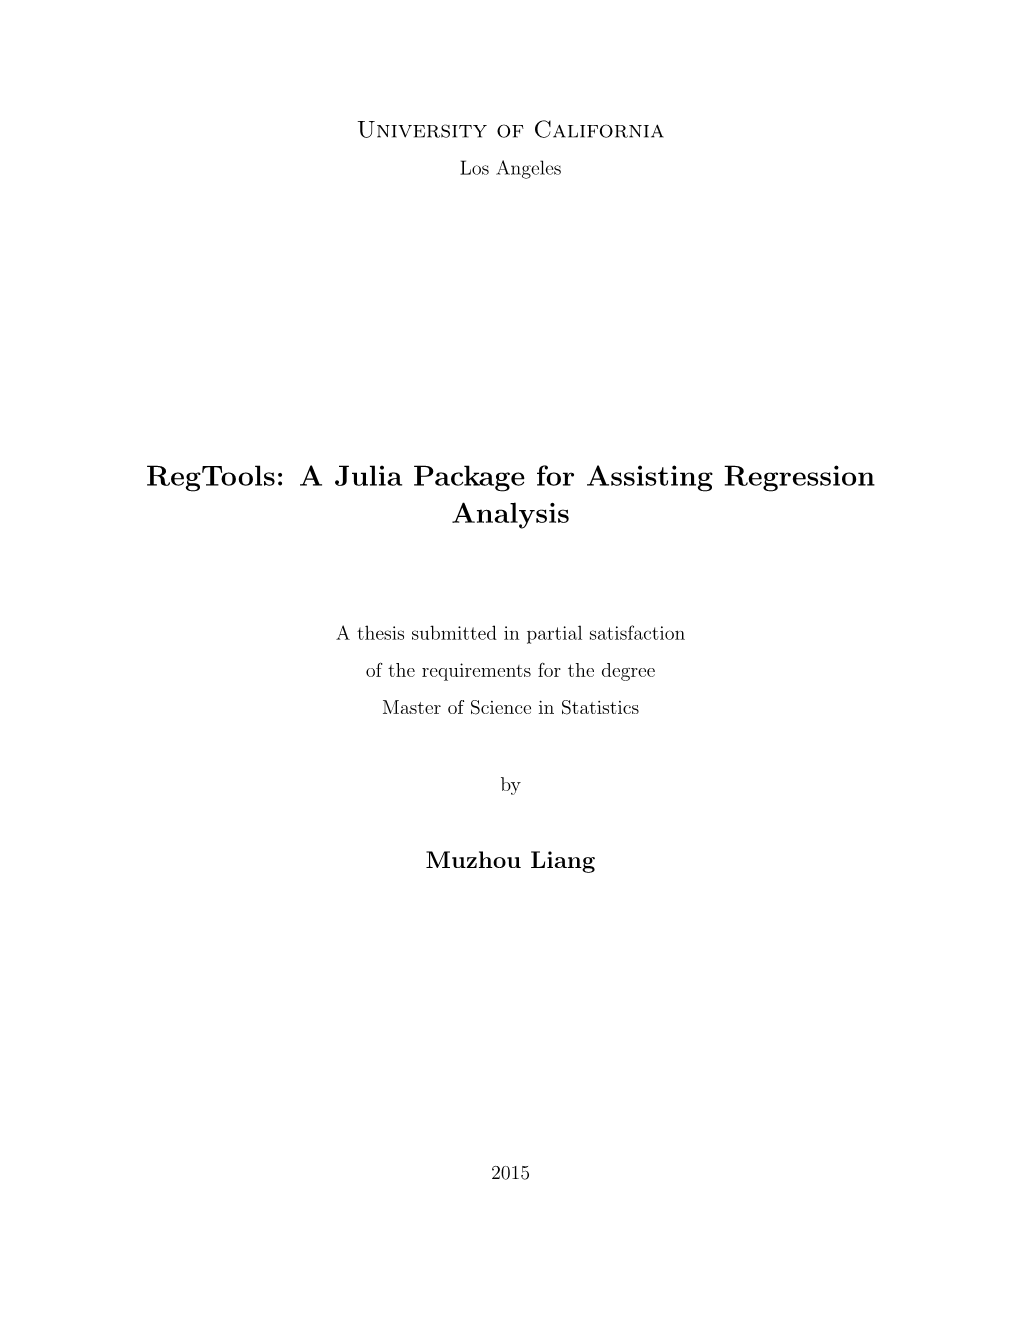 A Julia Package for Assisting Regression Analysis